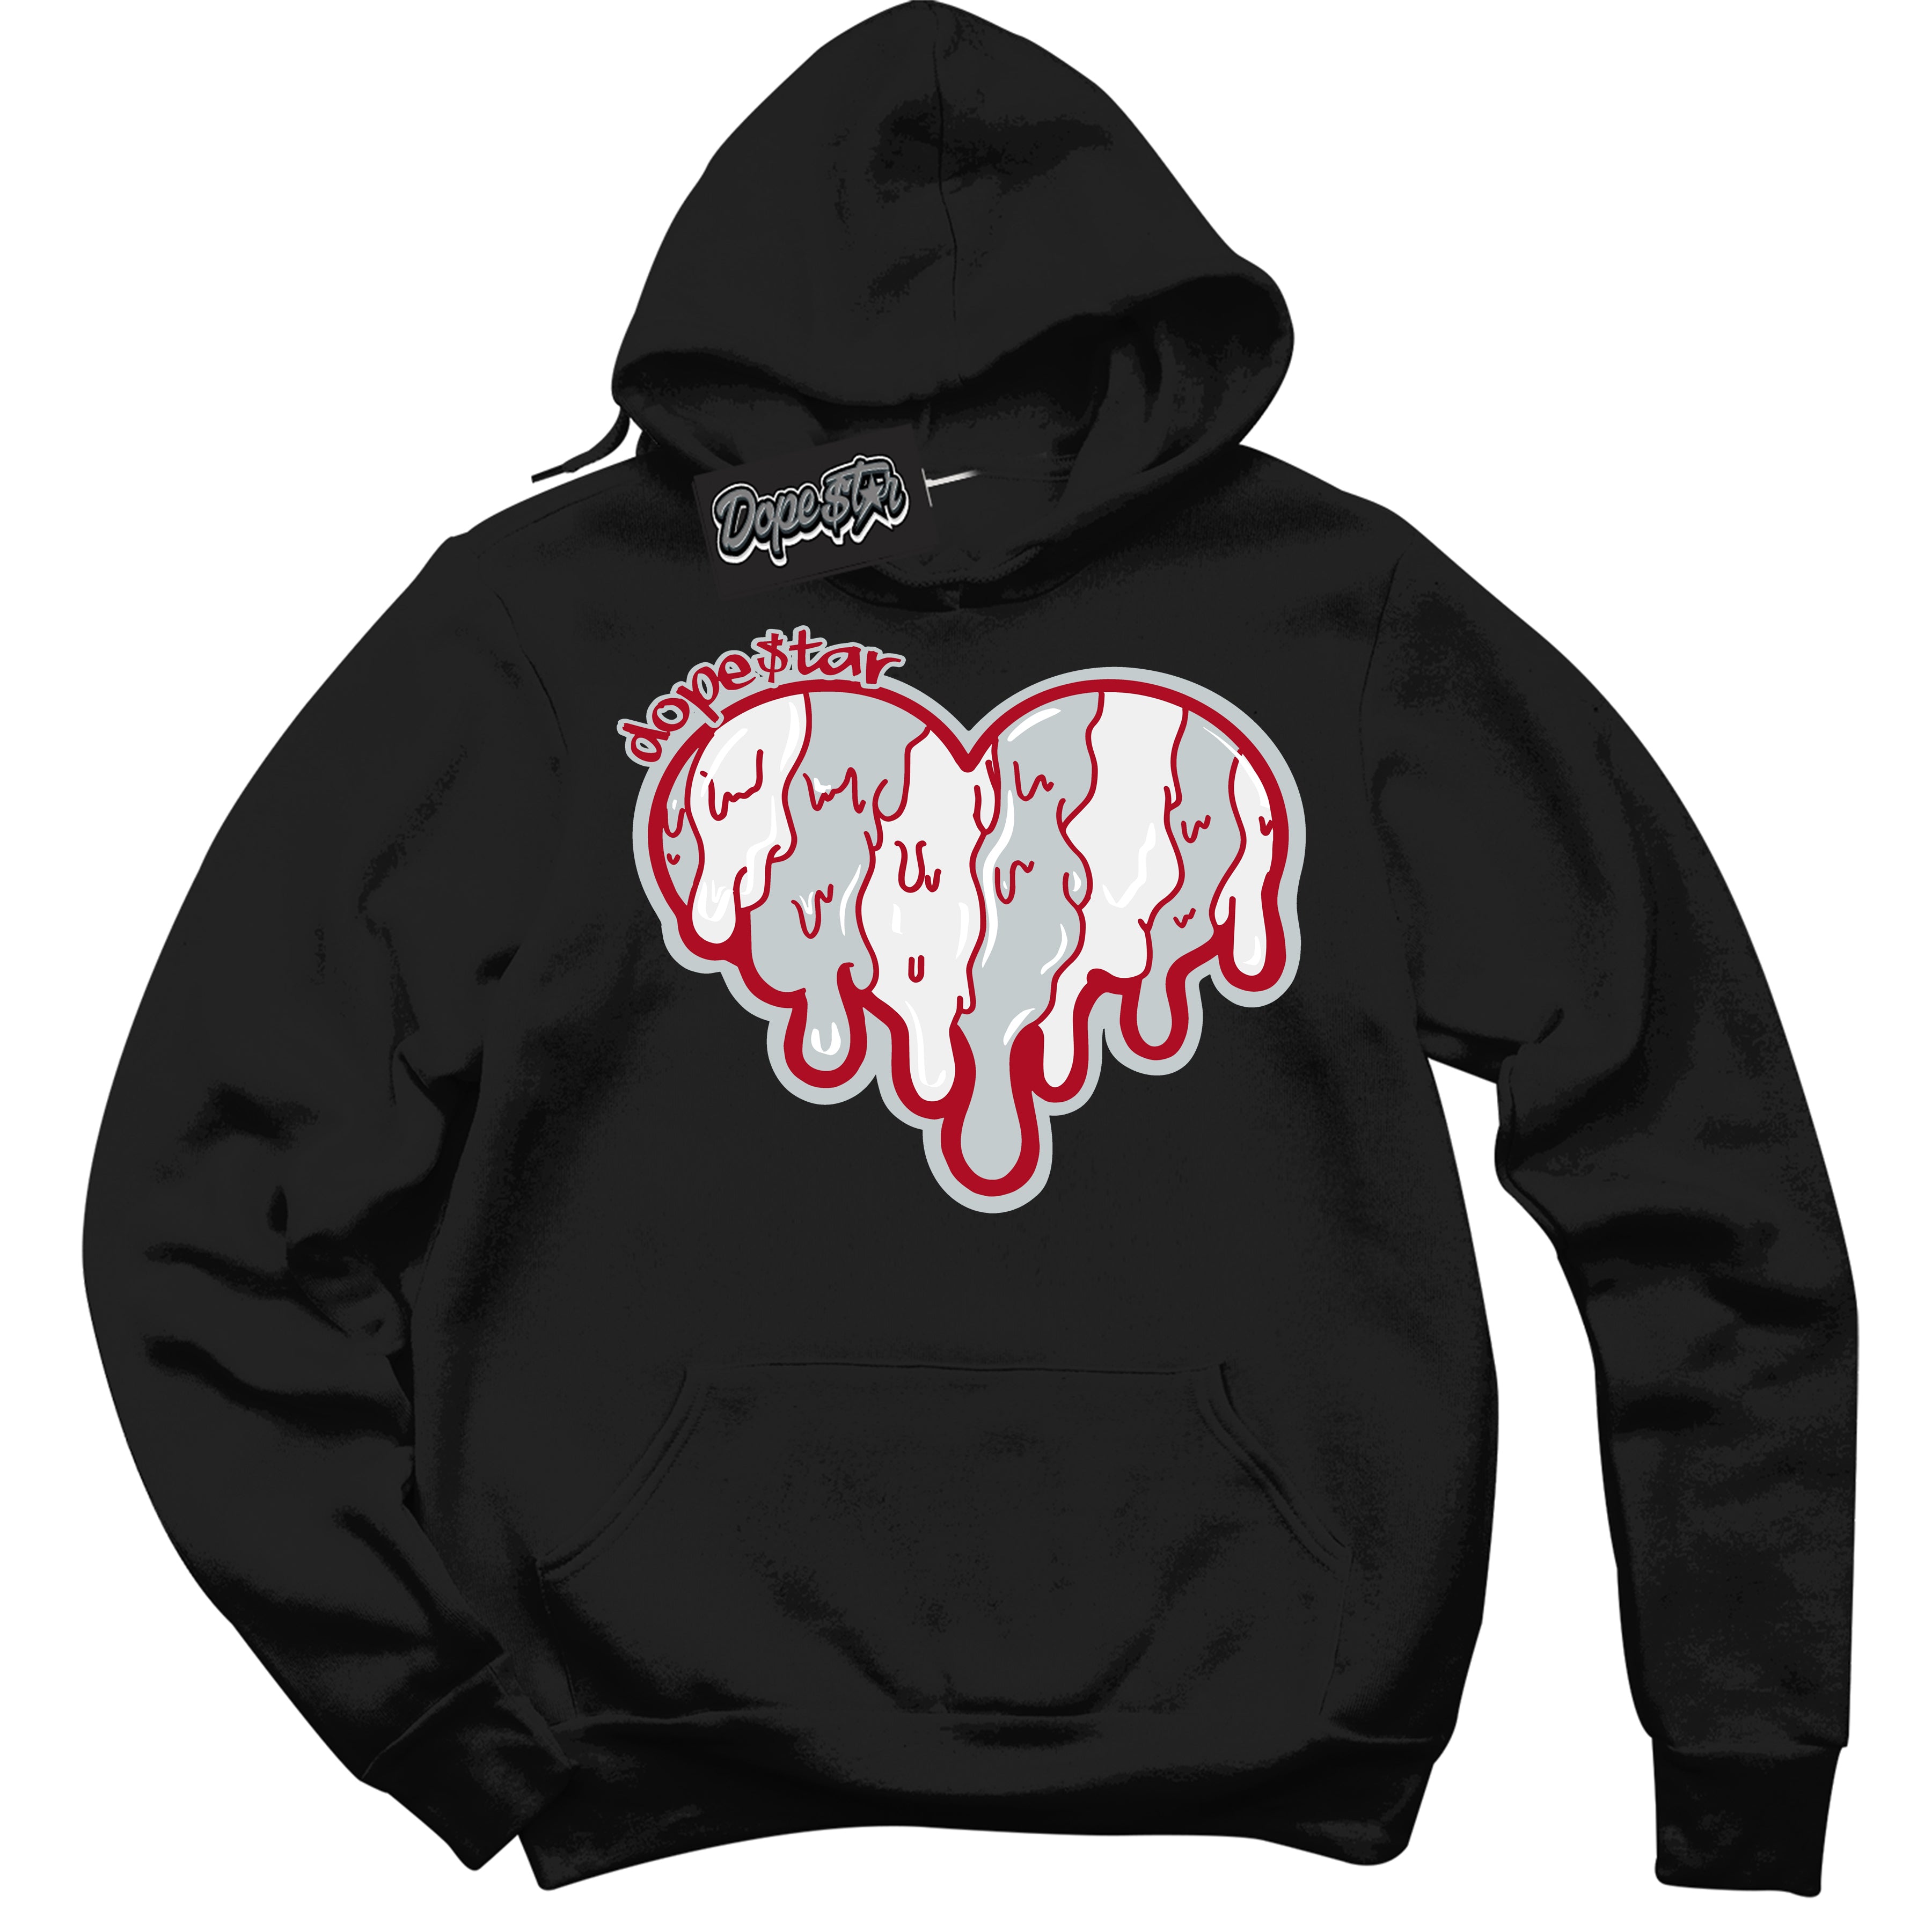 Cool Black Hoodie with “ Melting Heart ”  design that Perfectly Matches  Reverse Ultraman Sneakers.